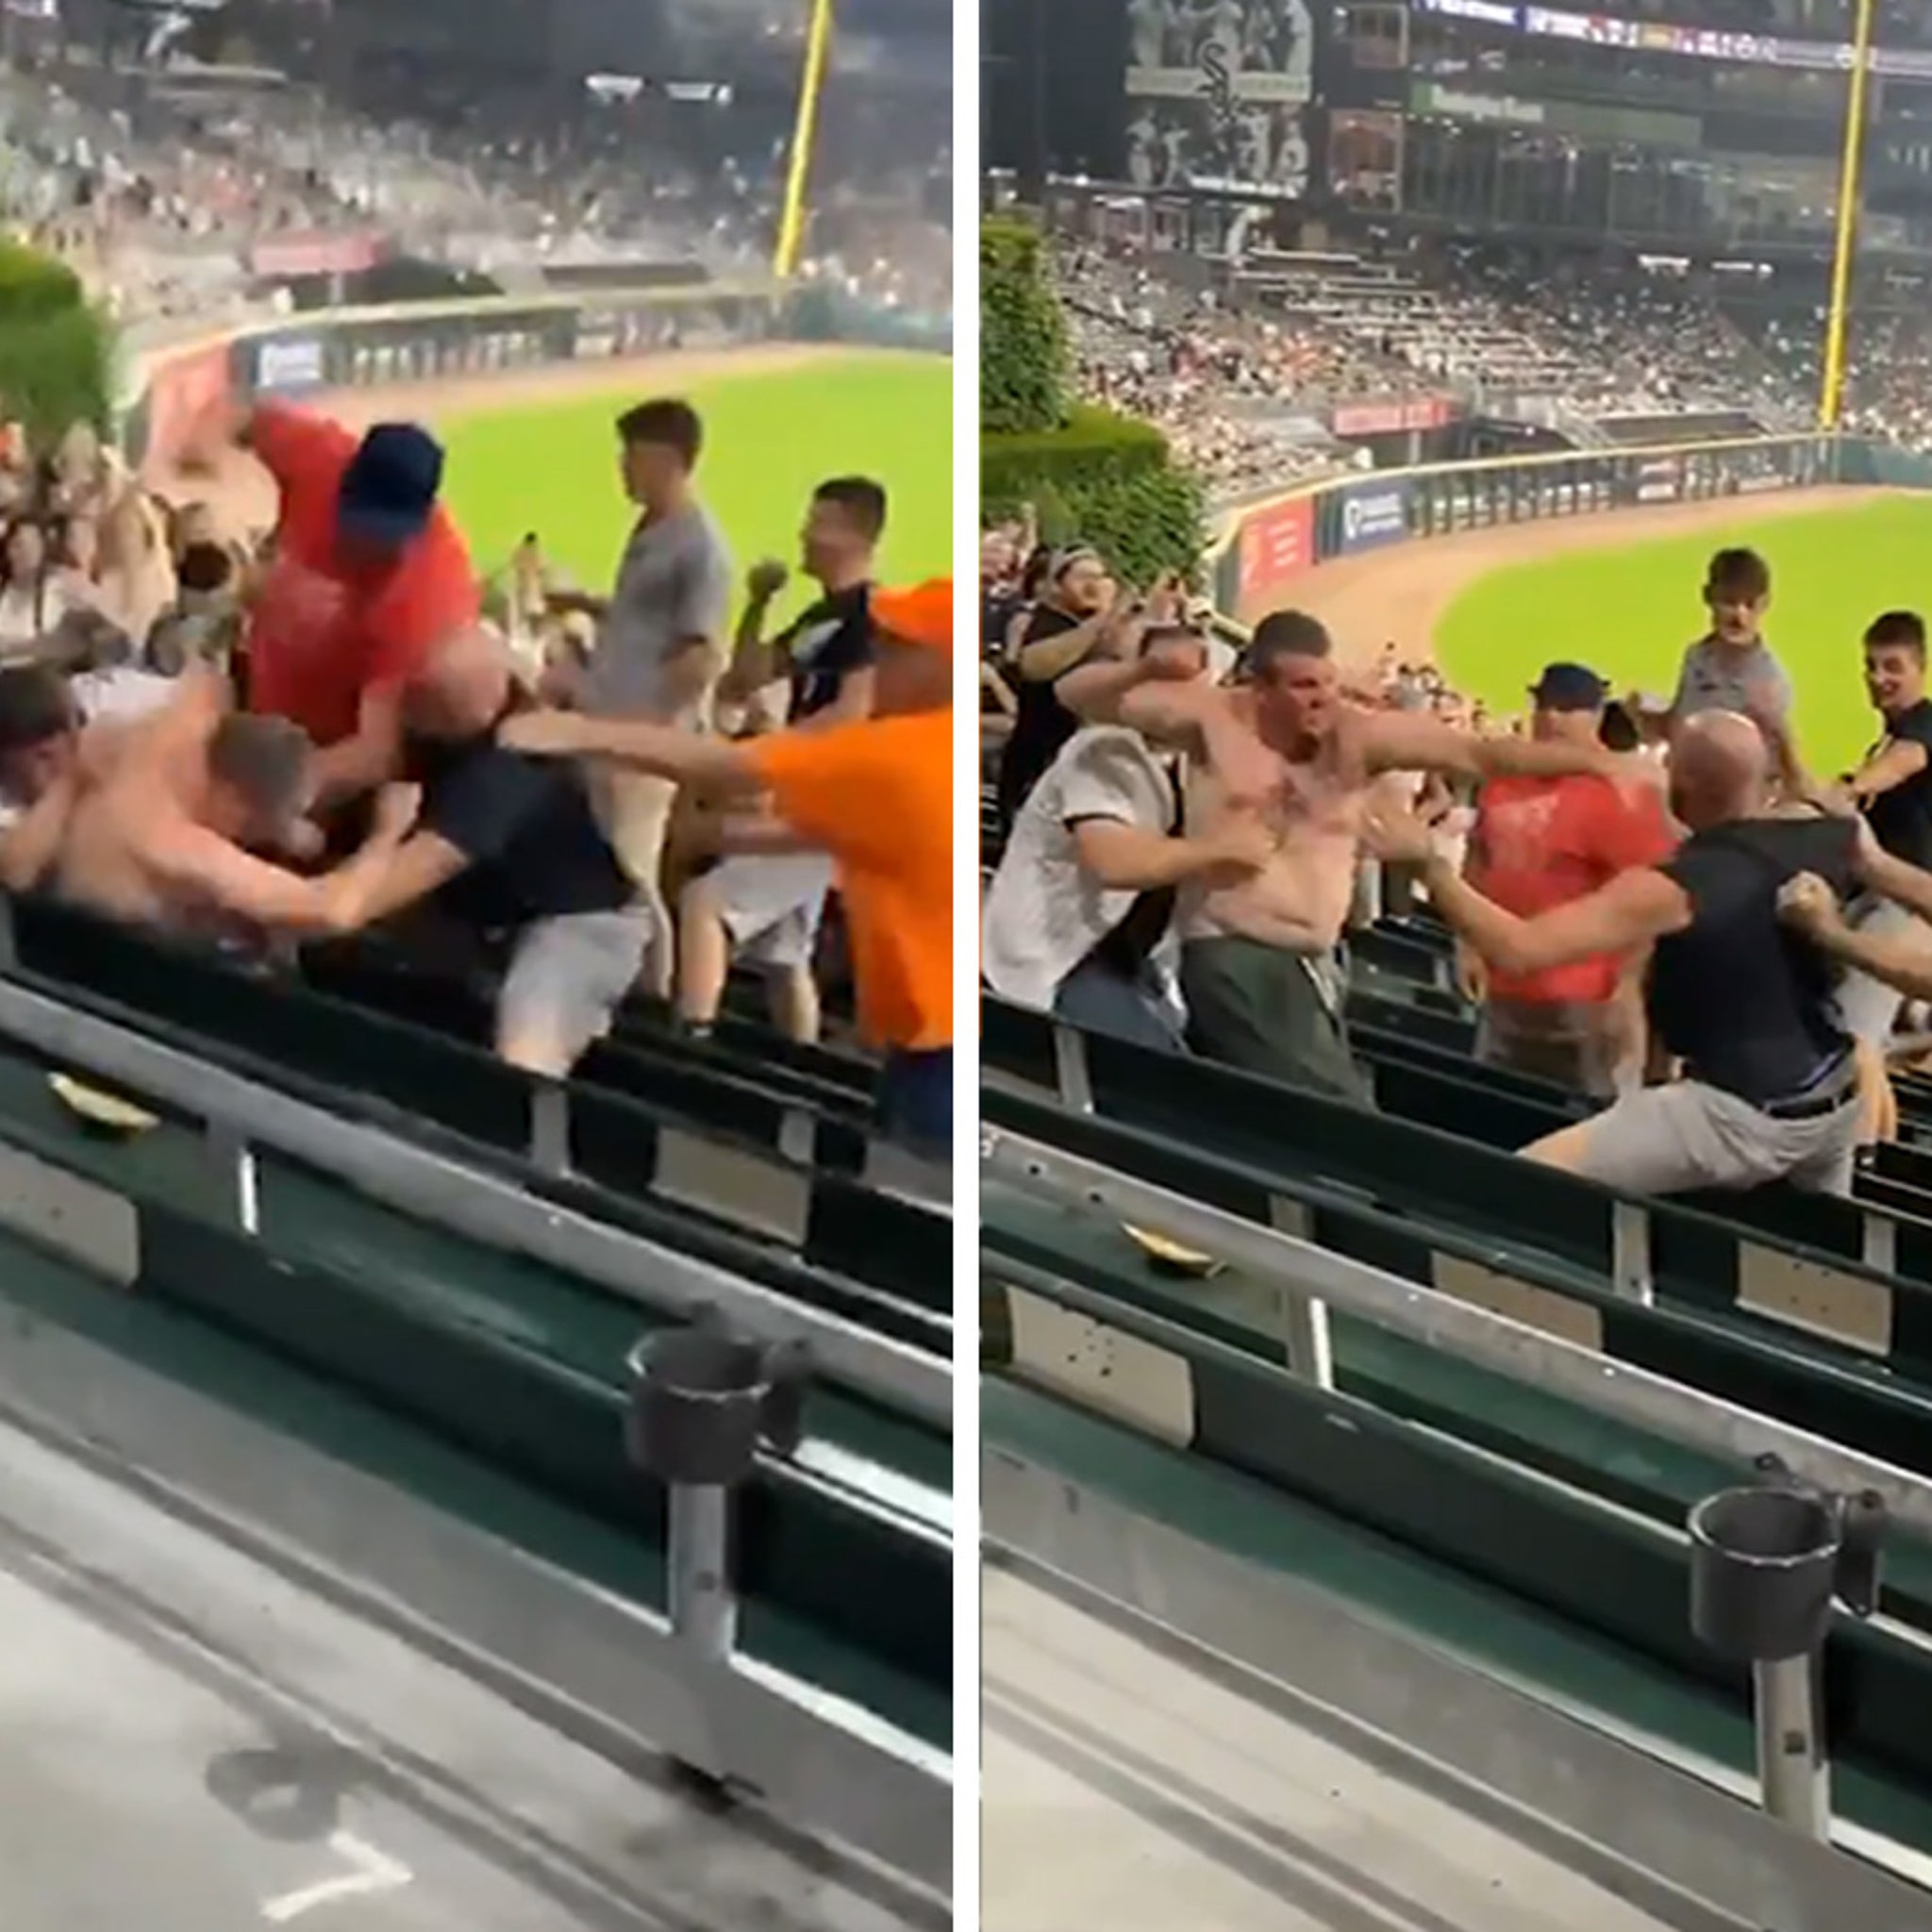 HUGE brawl breaks out at Chicago White Sox baseball game as male and female  fans swing punches